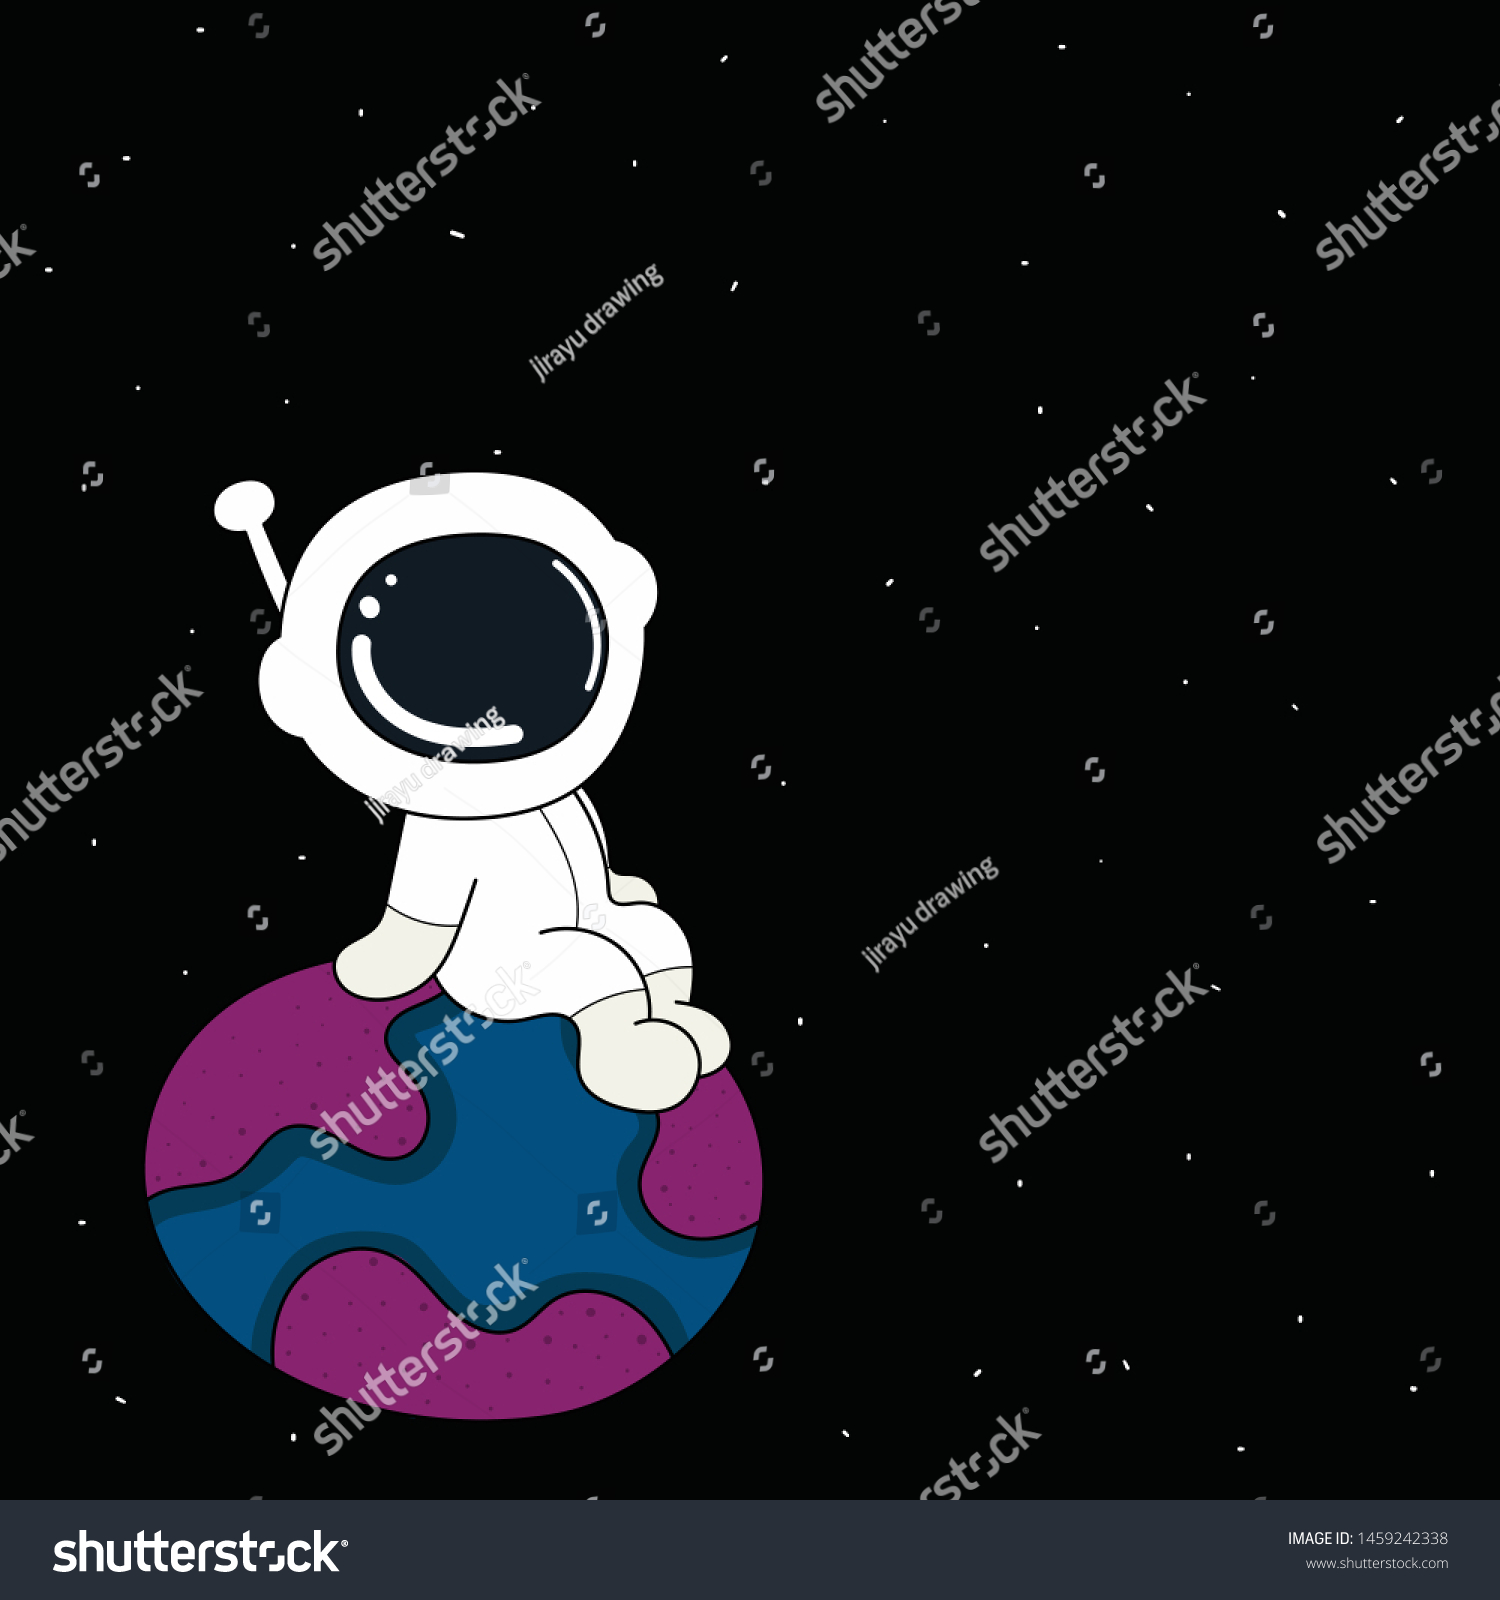 Astronaut Sits On Earthcute Spaceman Alone Stock Vector Royalty Free 1459242338 0836